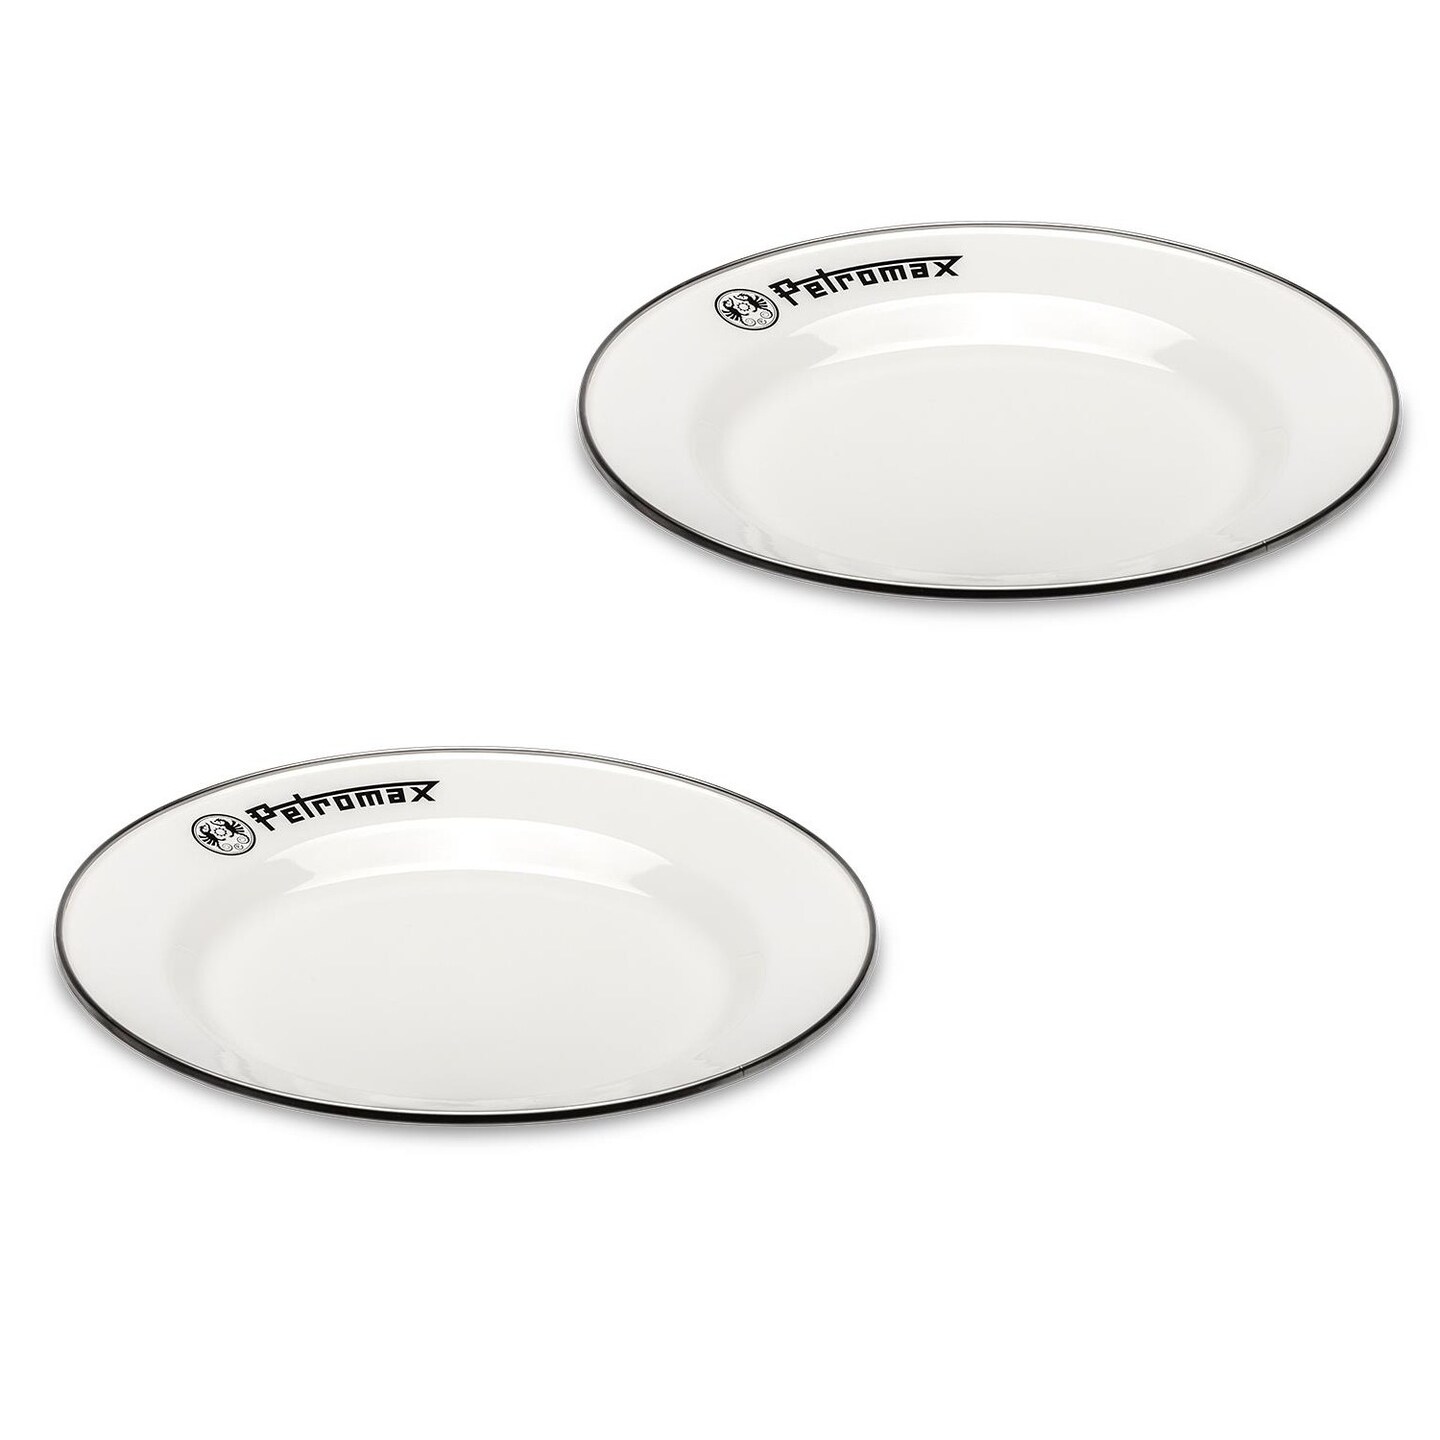 Petromax Enamelware Dinnerware Plates, Traditional Lightweight Enameled  Steel Tableware for Kitchen and Camping, 2 Pack for Hot or Cold Food, 8.6